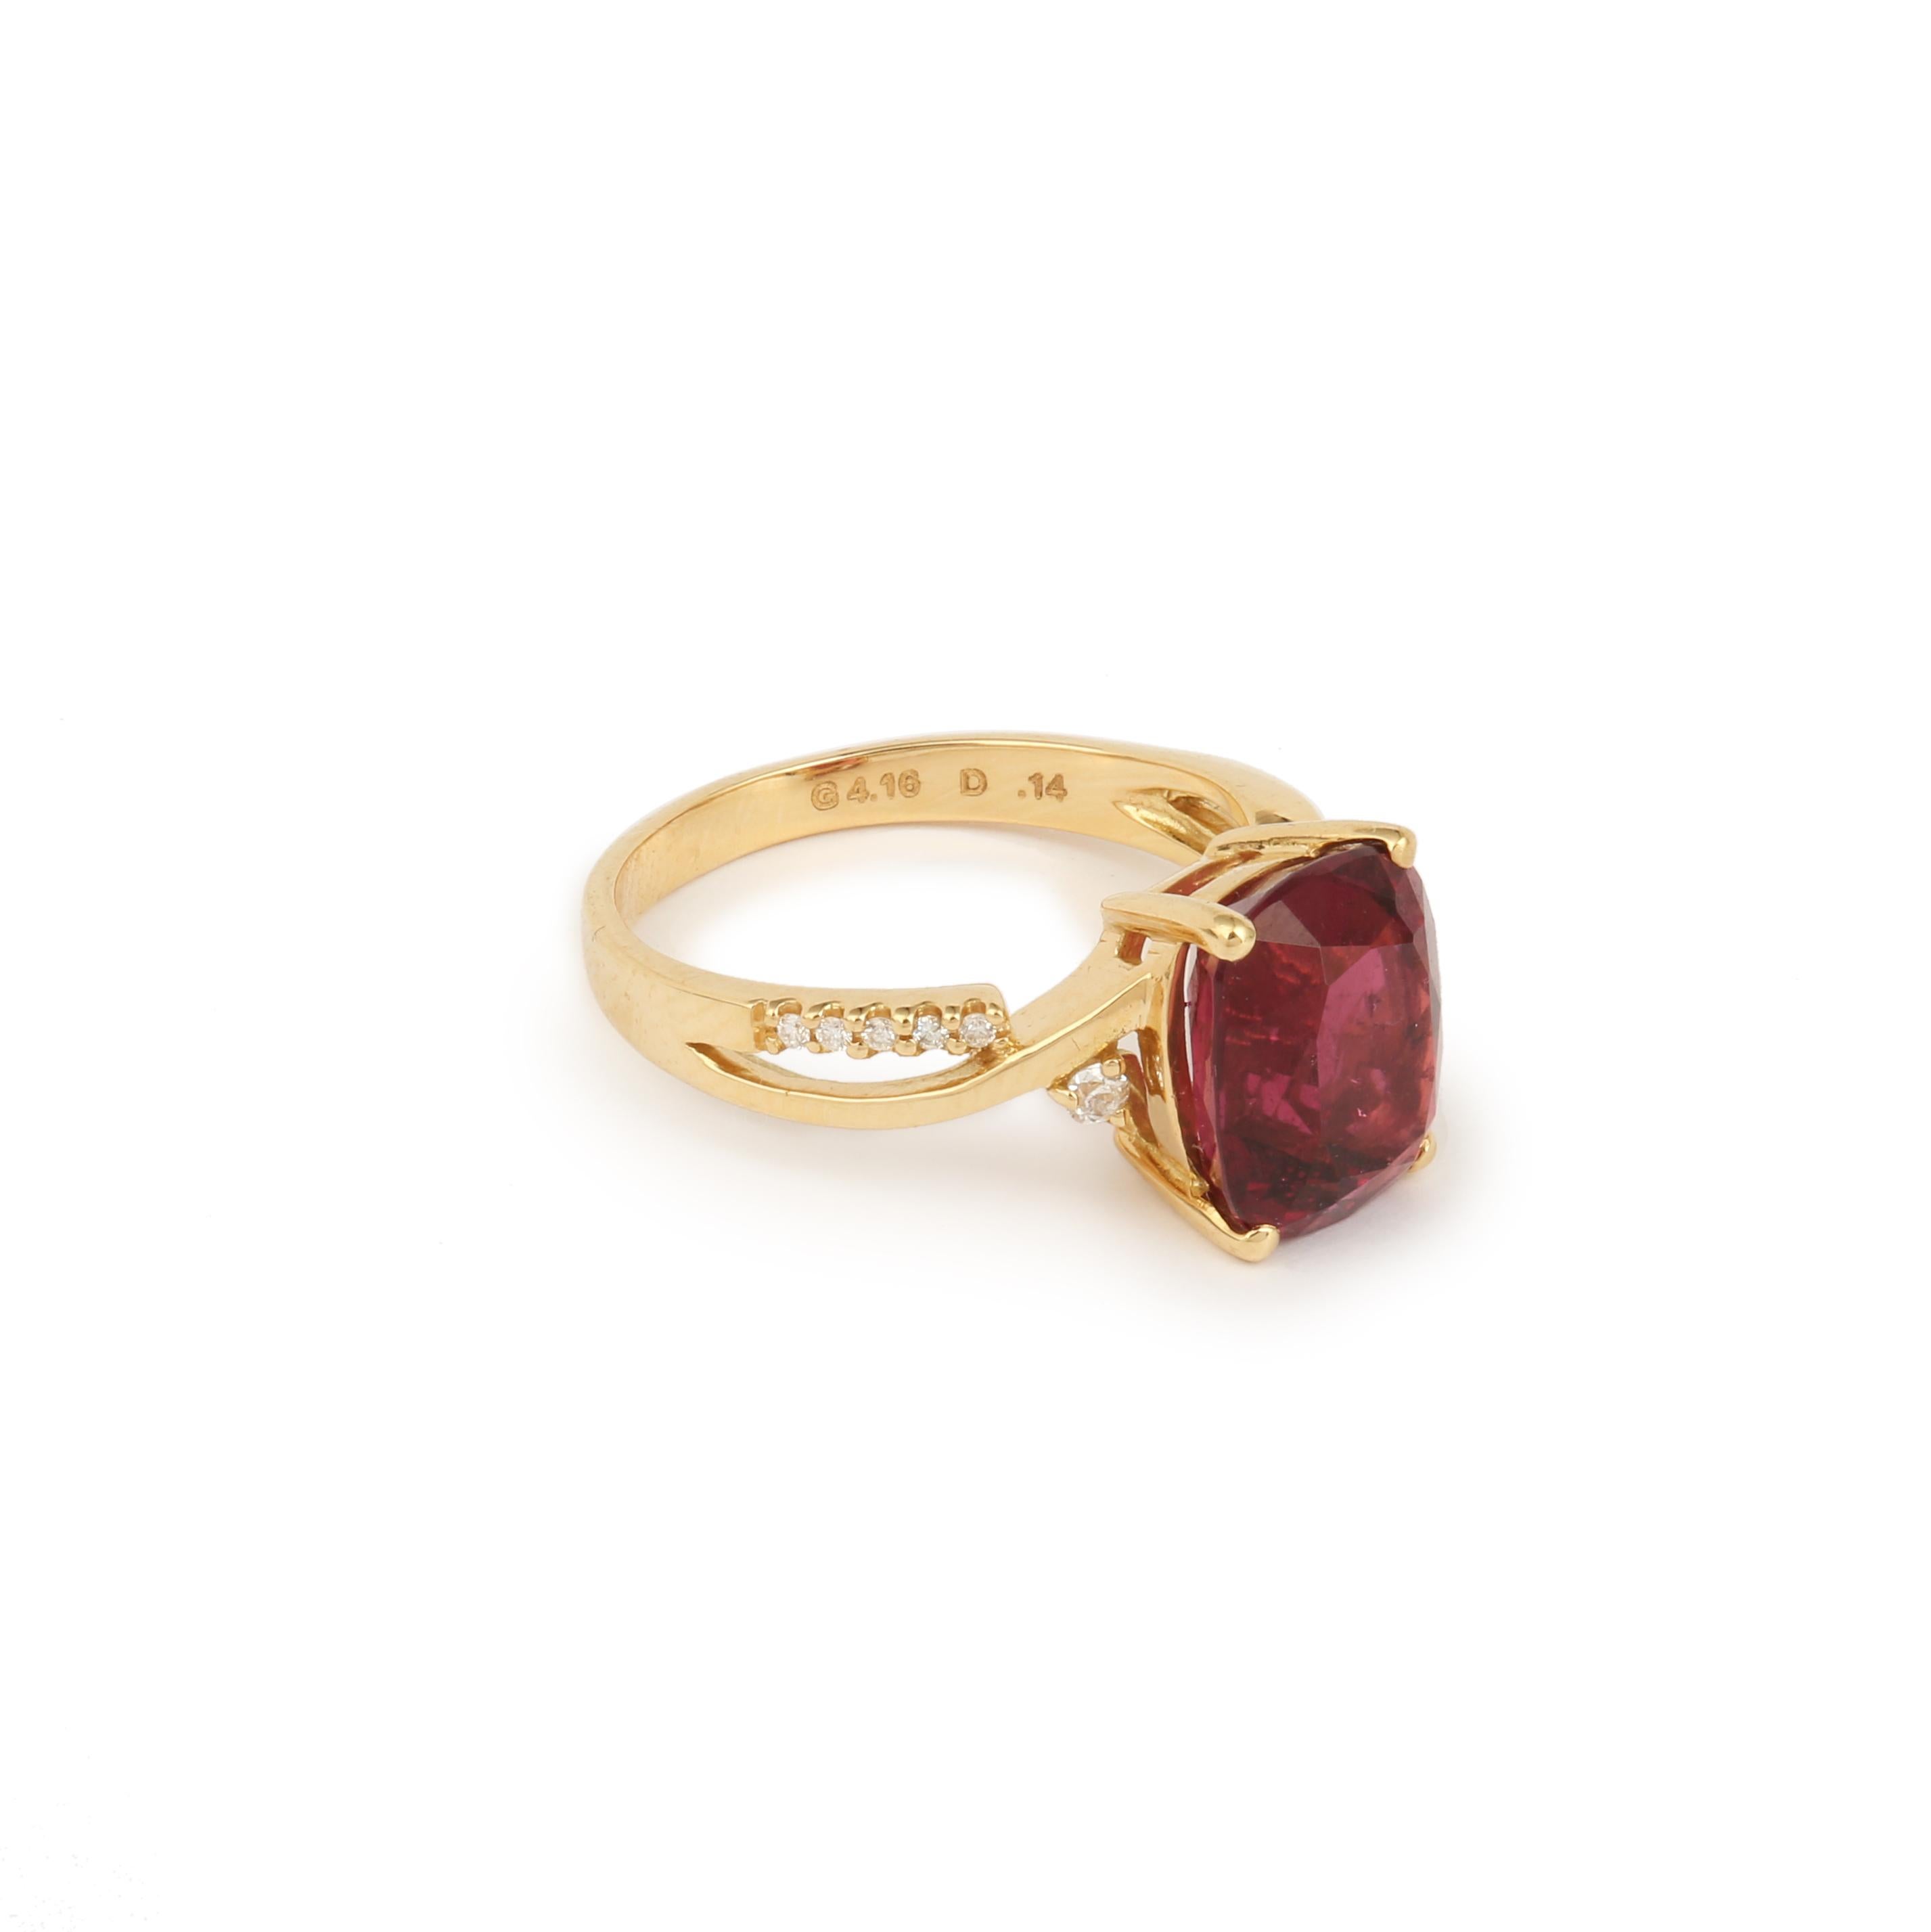 Lovely yellow gold ring paved with diamonds and set with a cushion-cut rubellite in its center.

Ideal for an engagement!

Rubellite estimated weight: 4.16 carats

Total estimated diamond weight: 0.14 carats

Dimensions : 20.05 x 10.39 x 7.35 mm